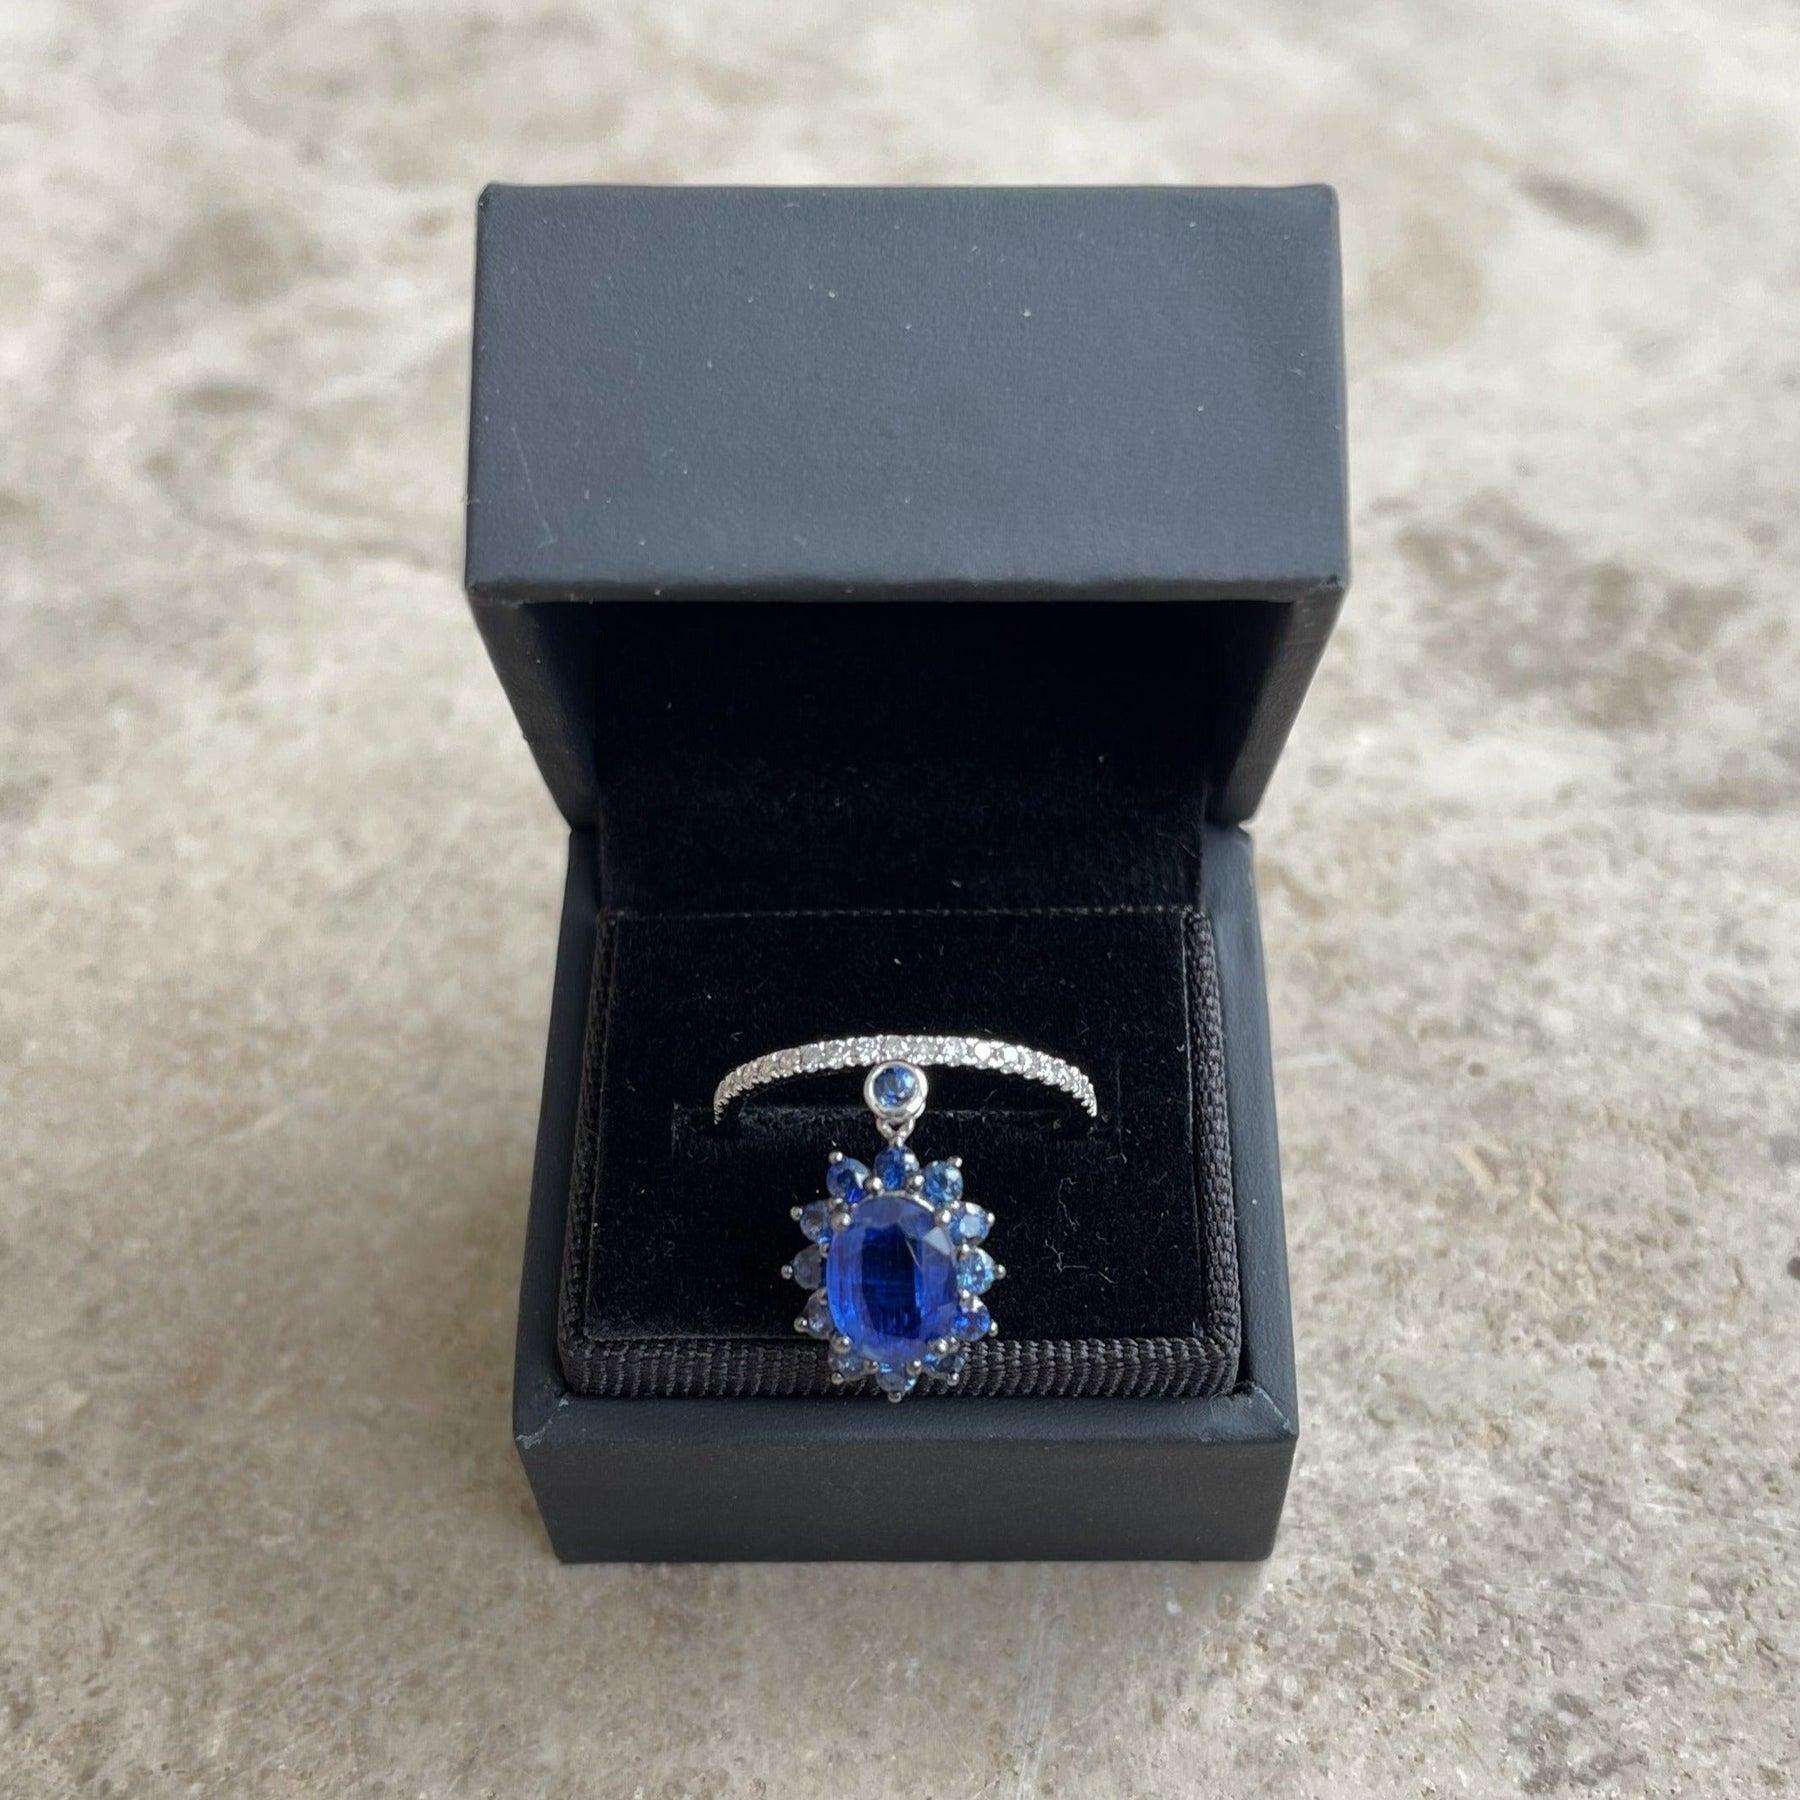 For Sale:  18ct White Gold Ring with 1.45ct Kyanite and Diamond 6